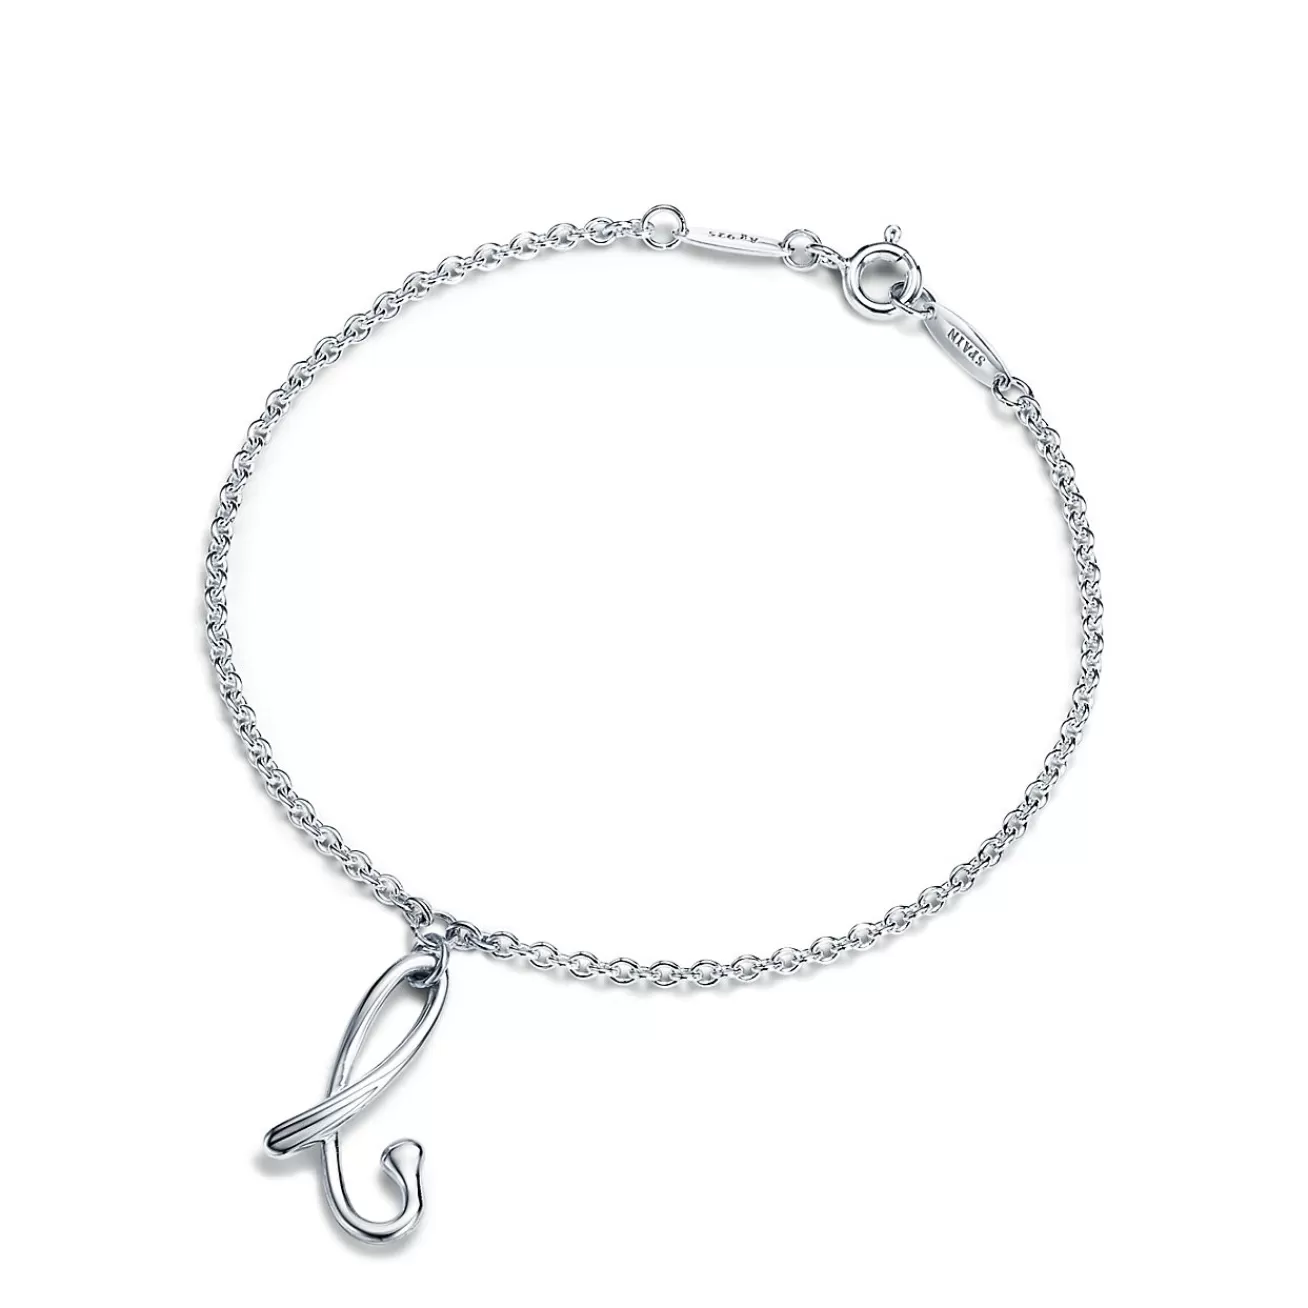 Tiffany & Co. Elsa Peretti® Alphabet bracelet in sterling silver. Letters A-Z available. | ^ Bracelets | Gifts for Her